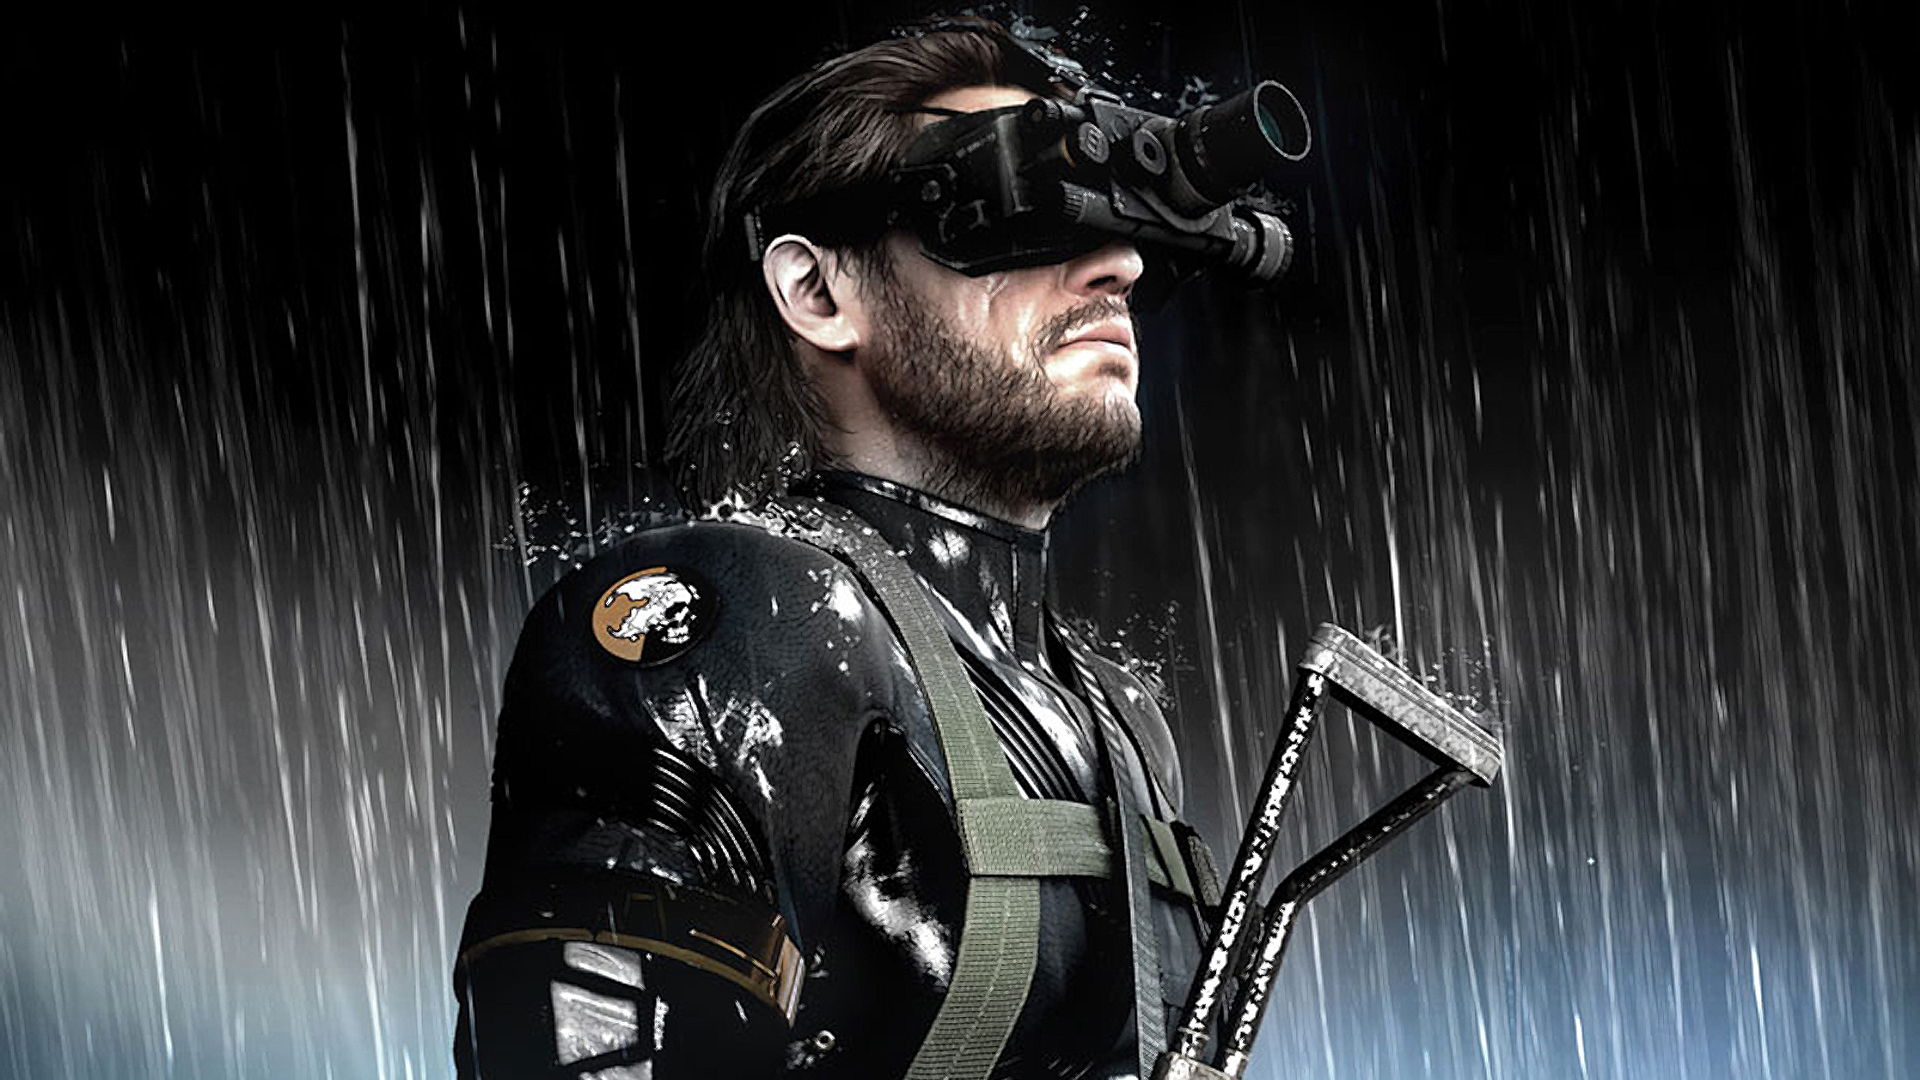 Video Game Metal Gear Solid V: Ground Zeroes HD Wallpaper | Background Image